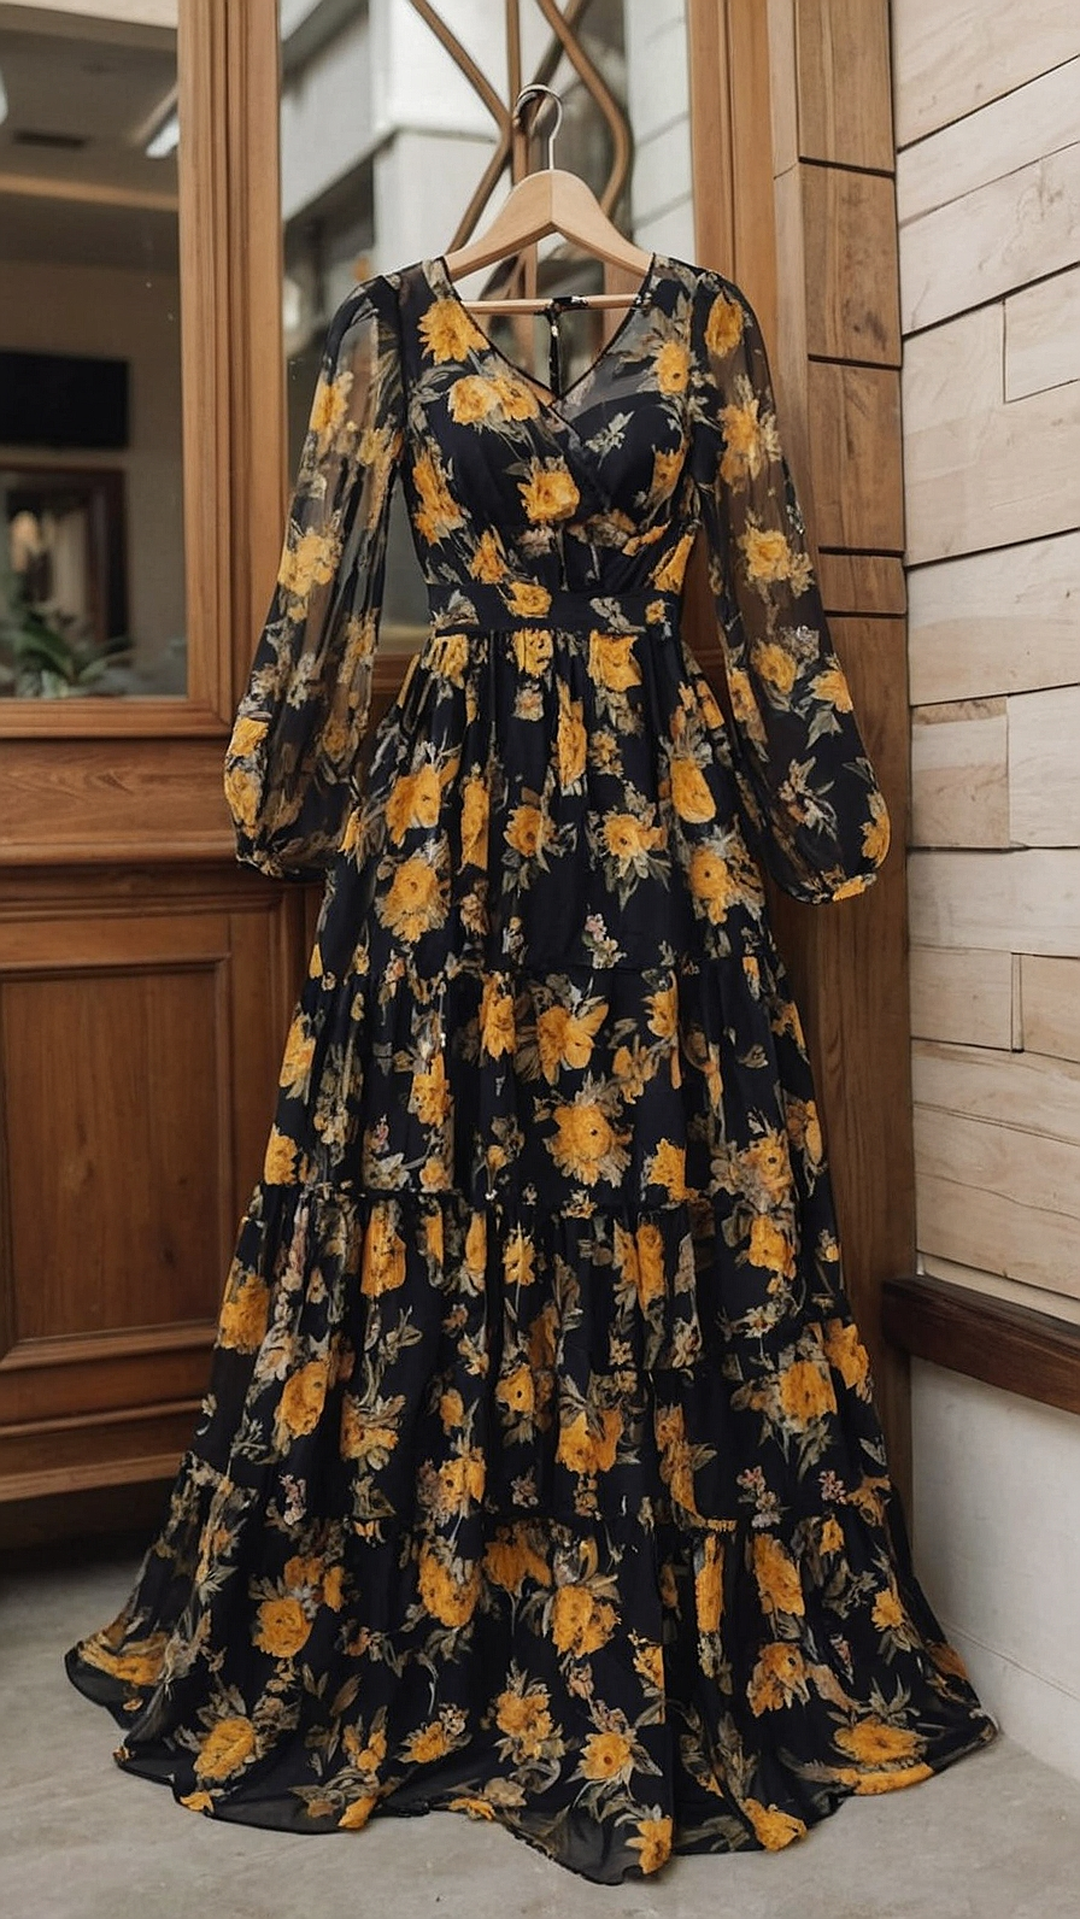 Fields of Fashion: Floral Maxi Dress Trends